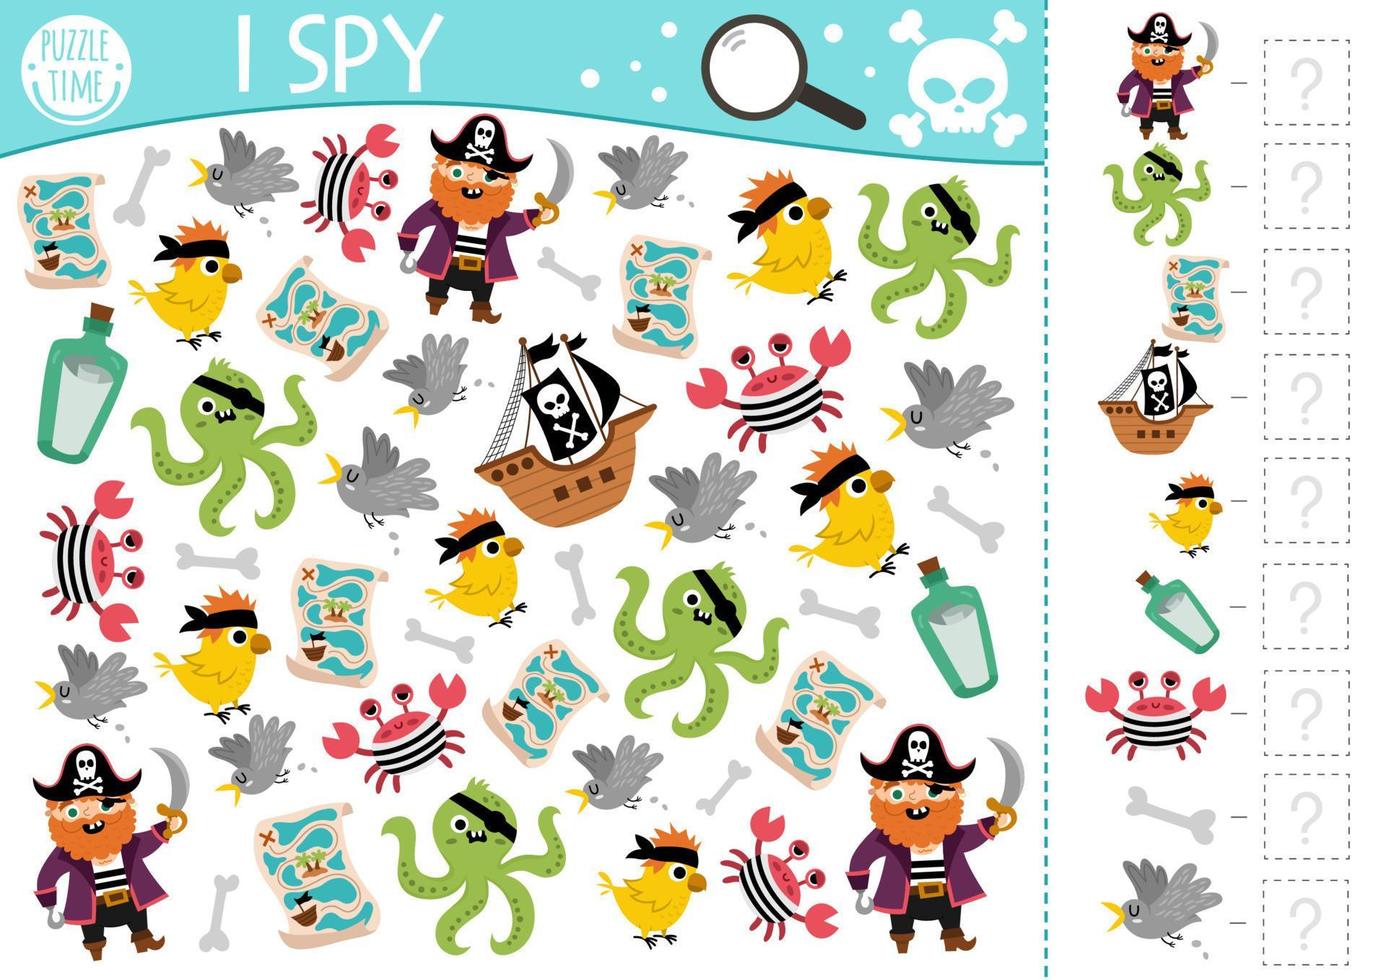 Pirate I spy game for kids. Searching and counting activity with pirates, animals, birds. Treasure island hunt printable worksheet for preschool children. Simple sea adventure spotting puzzle vector